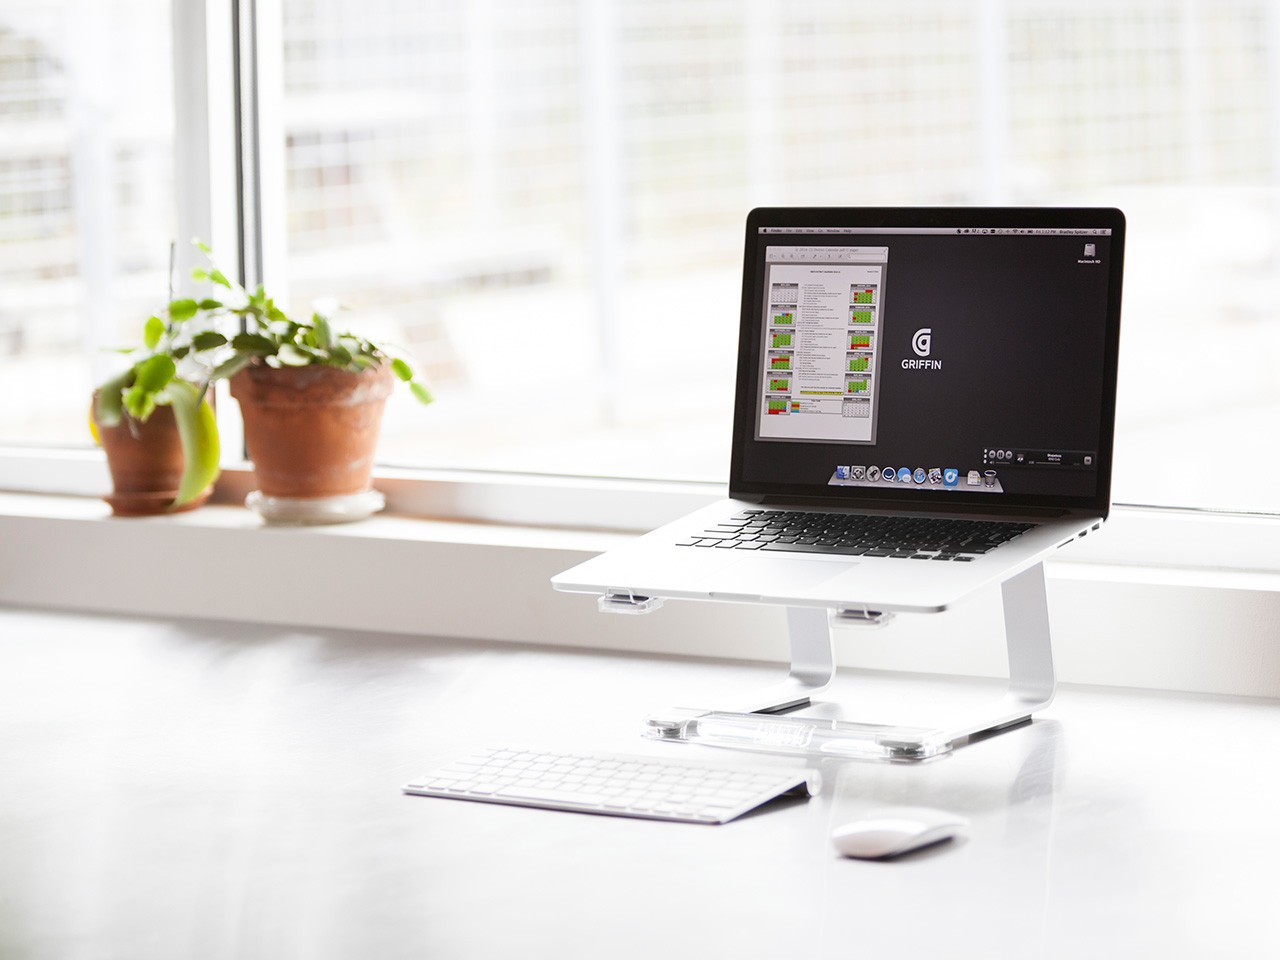 Griffin Elevator laptop stand: Good way to raise your laptop to eye level to create better posture and healthier desk habits